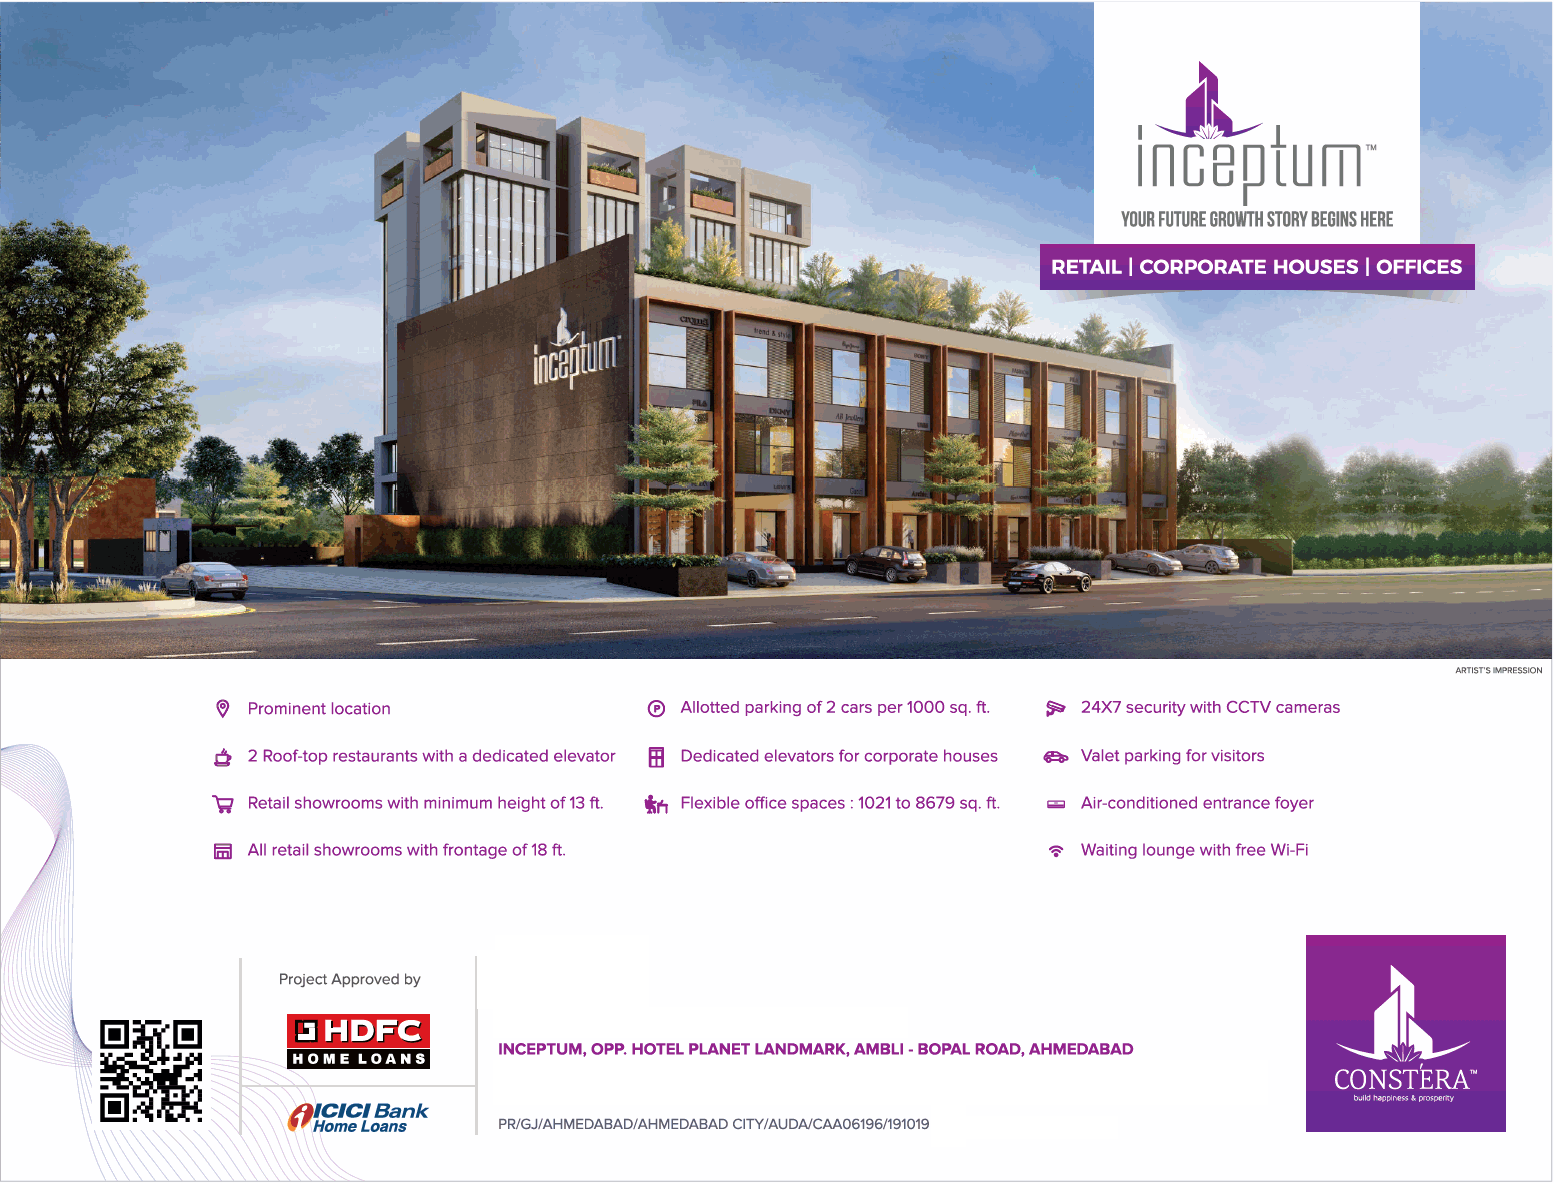 Retail, corporate houses, offices at Constera Inceptum in Ahmedabad Update